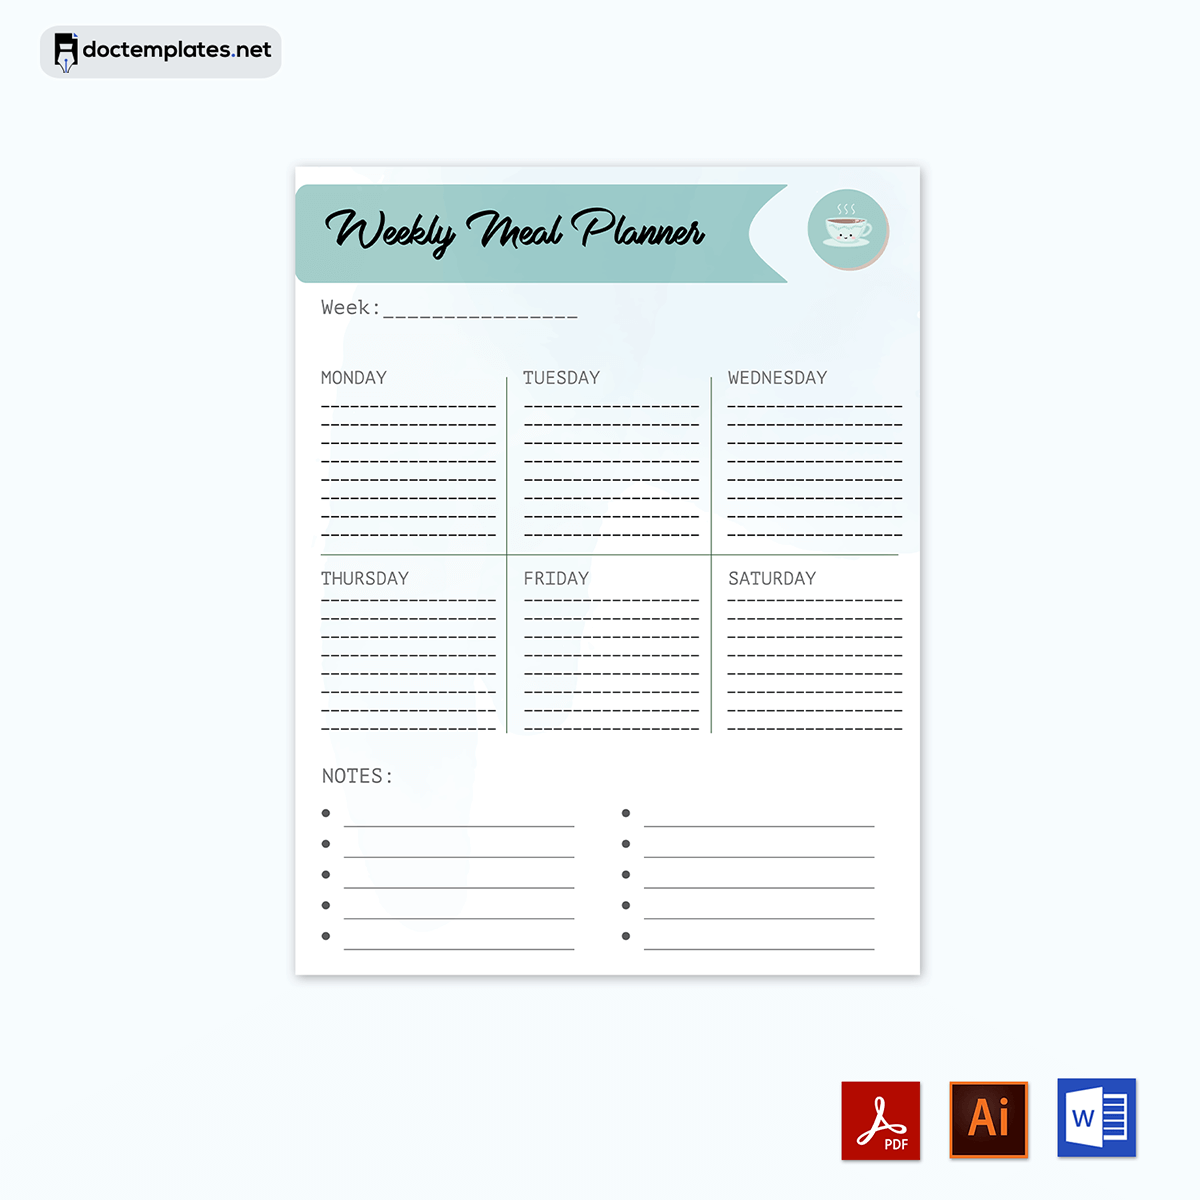 Exclusive Meal Planner for Busy Weekdays - Adobe Illustrator